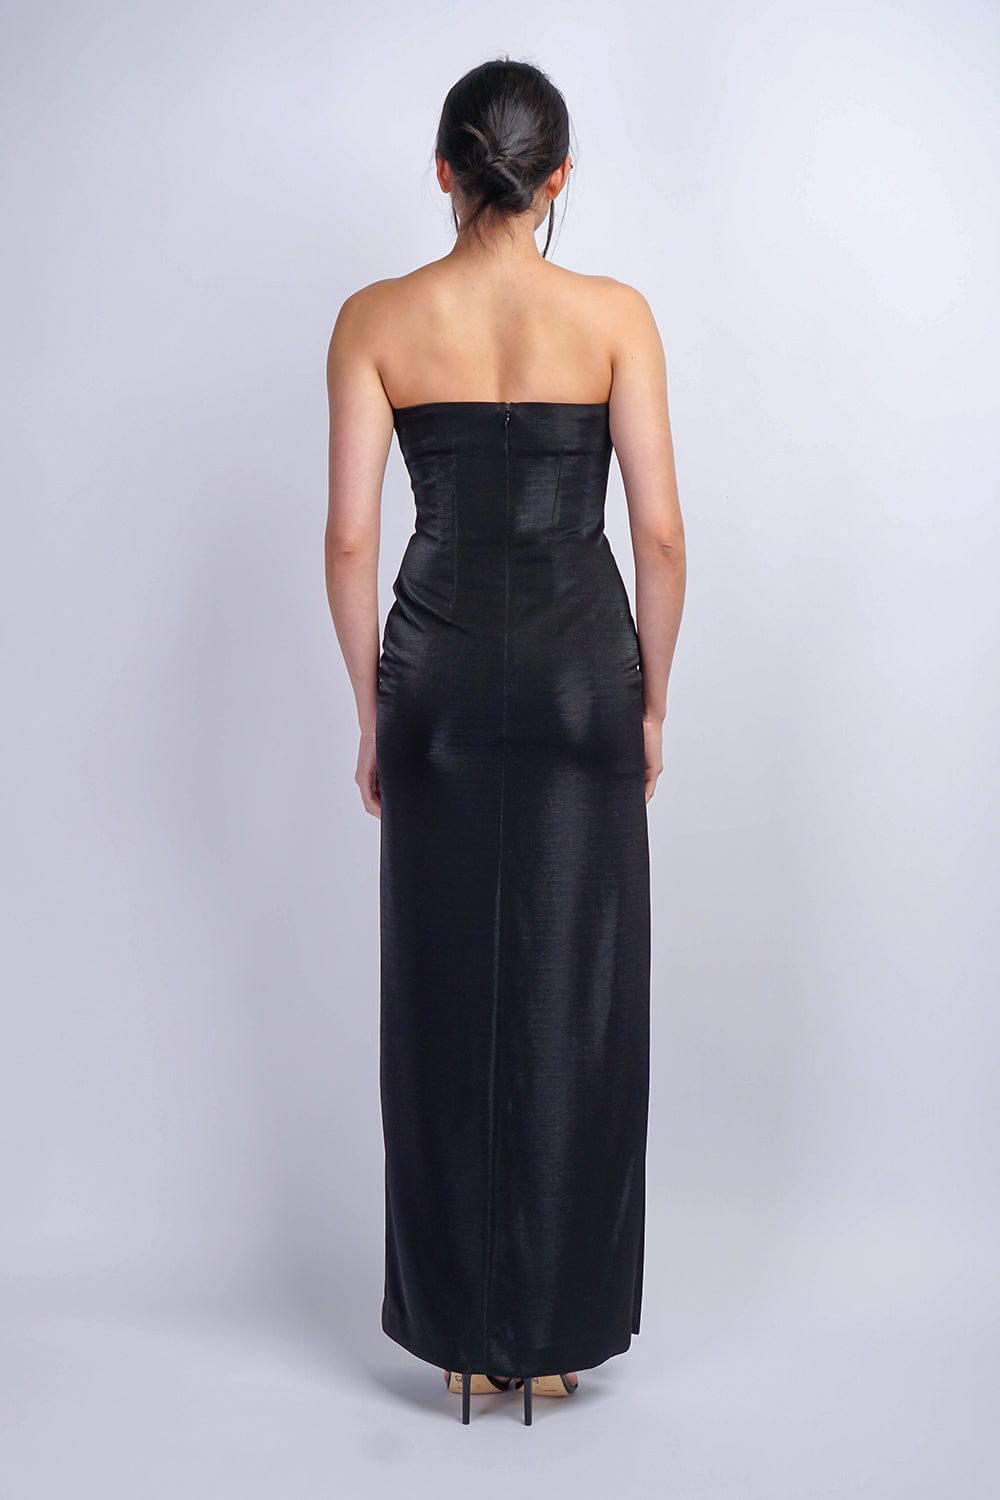 GOWNS Black Luxe Sheen Strapless Gown - Chloe Dao